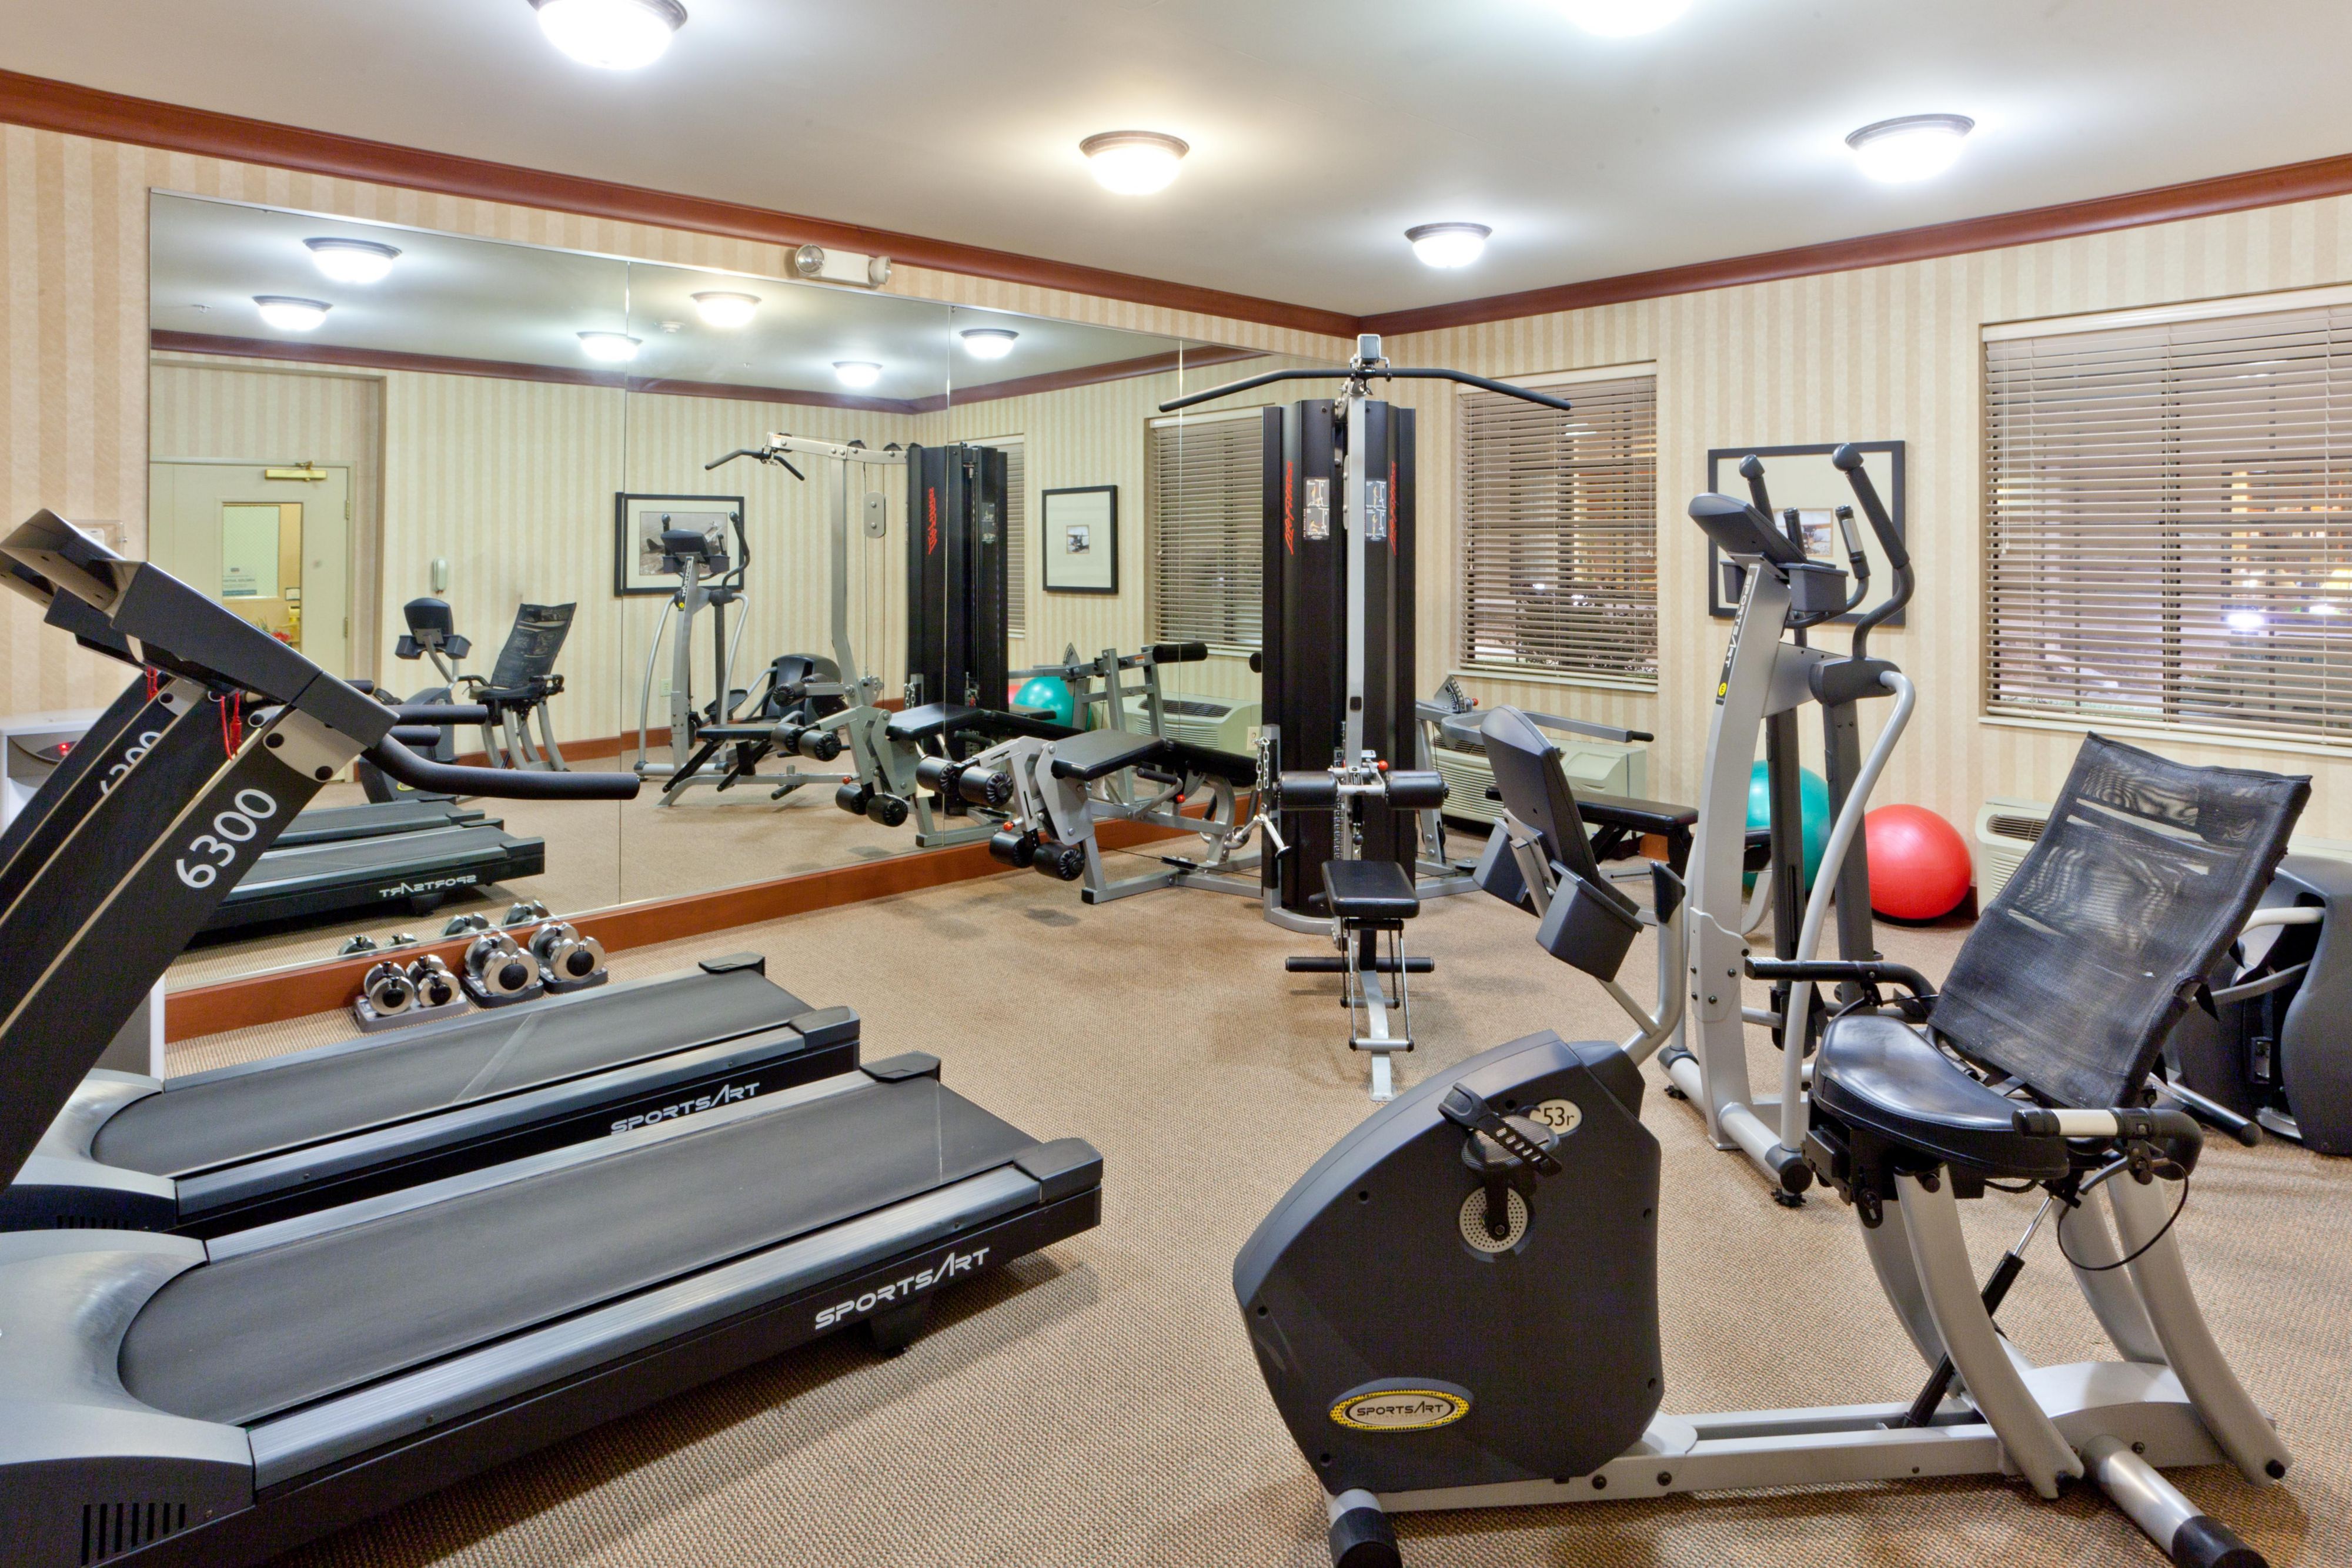 Get an invigorating workout in our 24-hour Fitness Center with equipment by Matrix. Our state-of-the-art gym is equipped with two treadmills, an elliptical machine, and an exercise bike, all with independent TV screens. Do some training with our universal weight machine, free weights, and exercise ball.